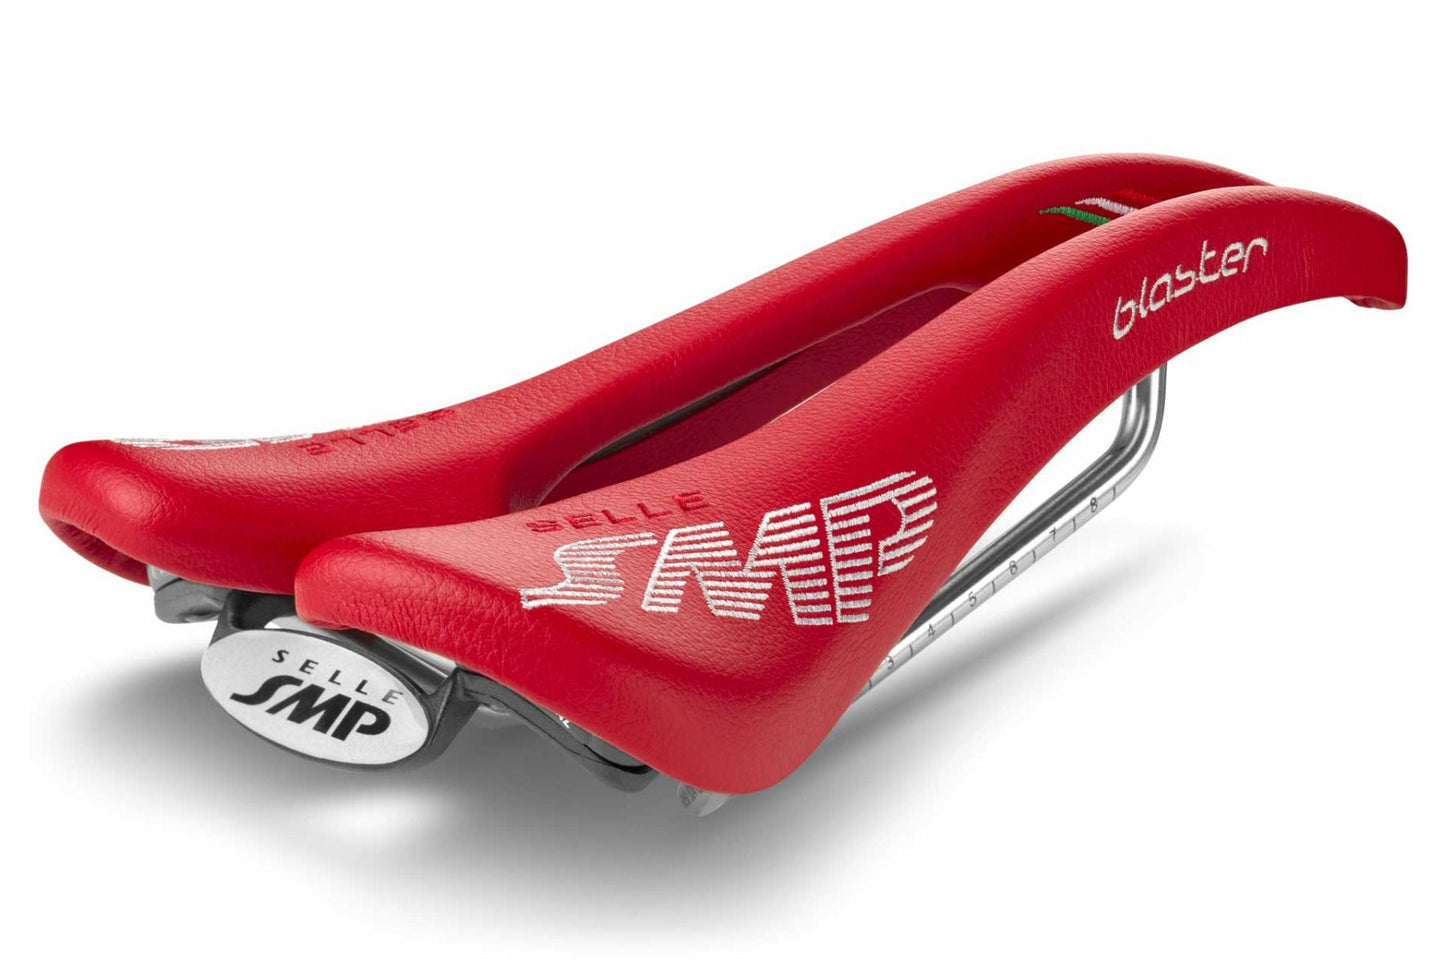 Selle SMP Blaster Saddle with Steel Rails (Red)